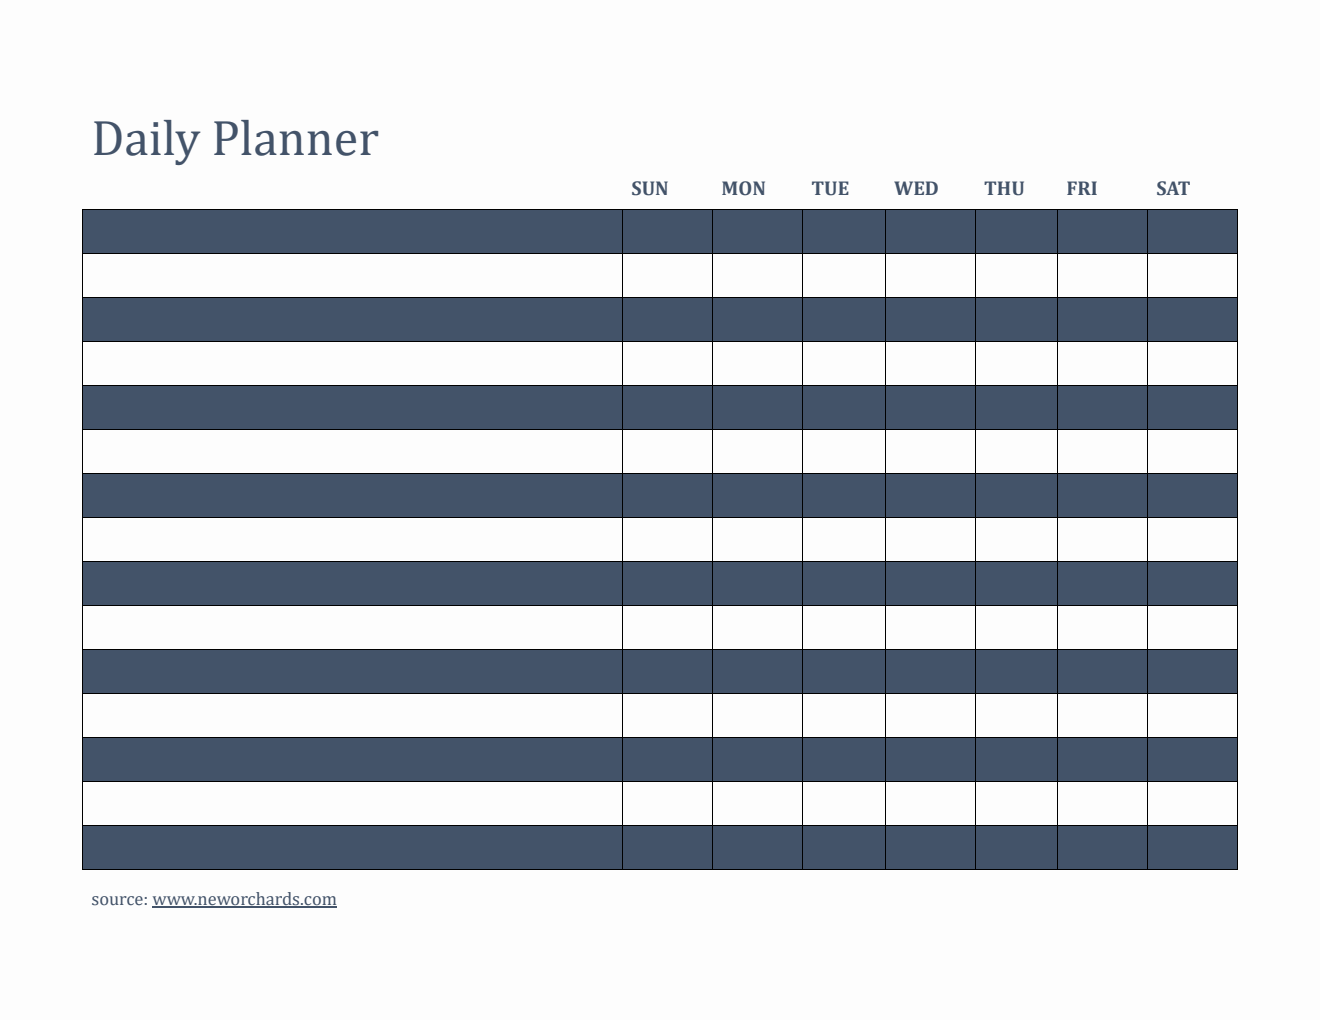 Daily Planner and Checklist Template in Word (Striped)